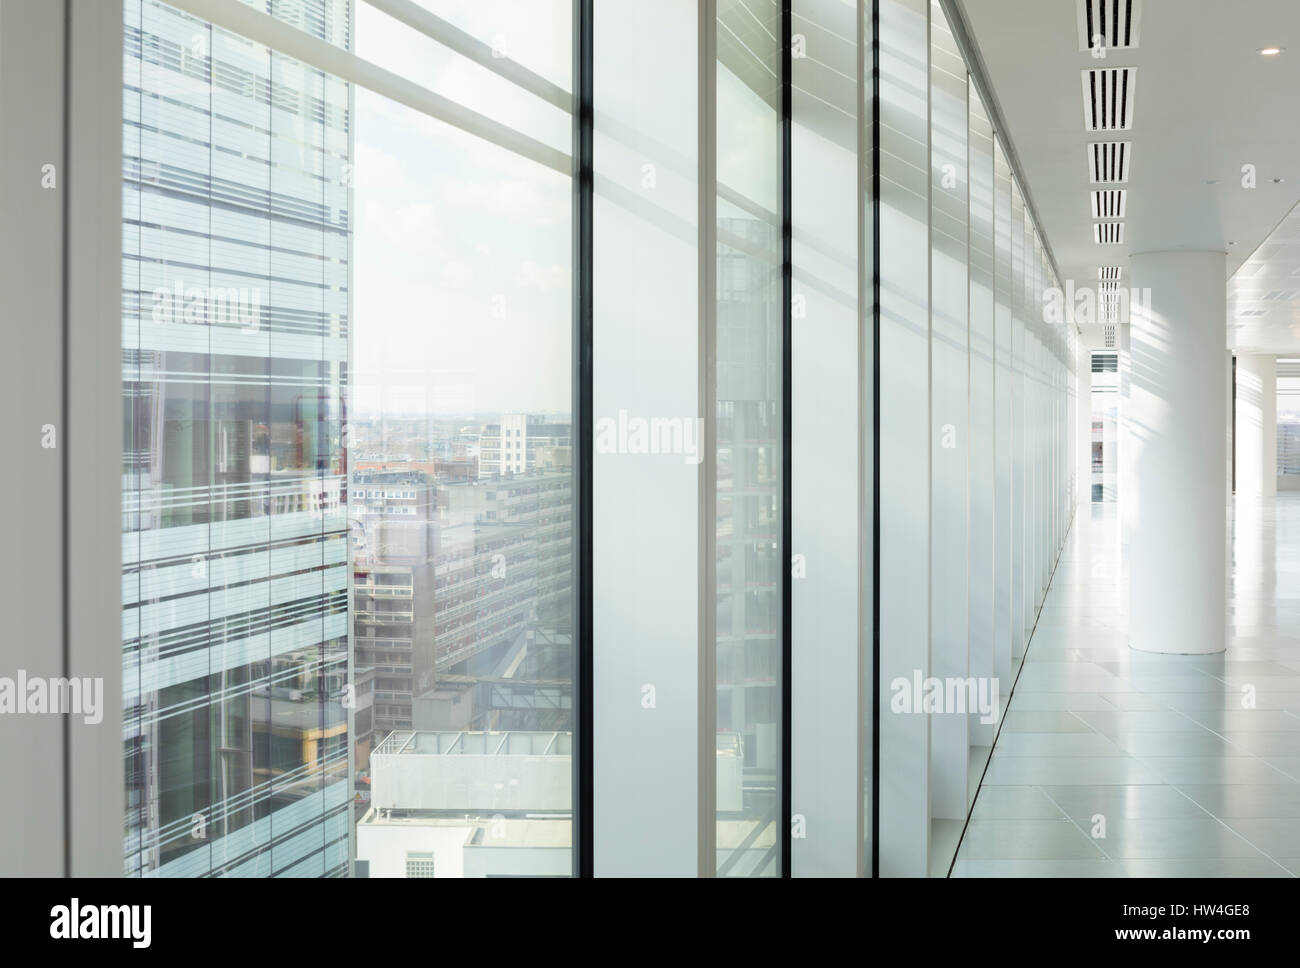 Interior view of 10 Hammersmith Grove, a new office development in London, UK. Stock Photo